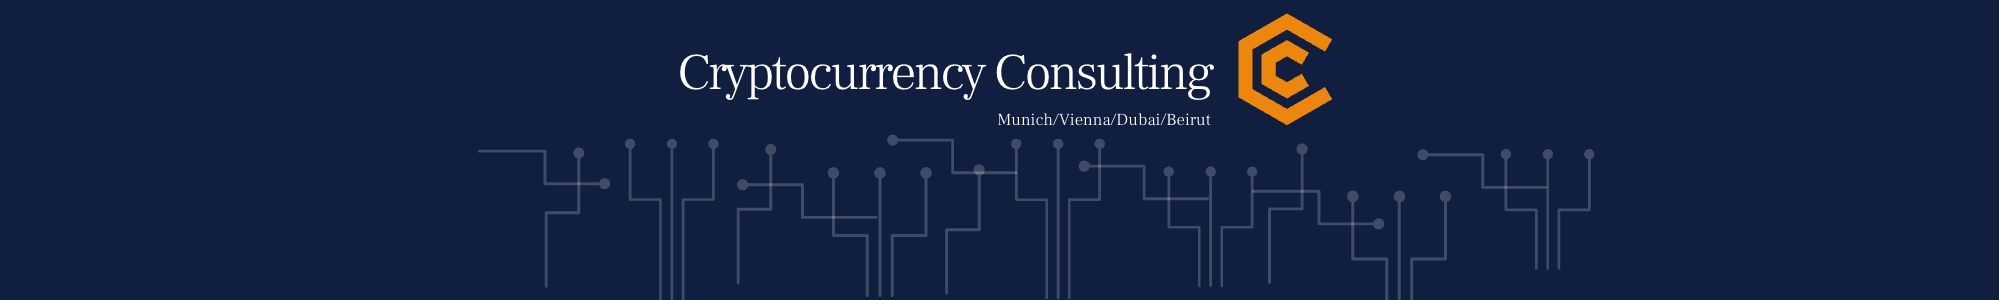 Cryptocurrencyconsulting 橫幅